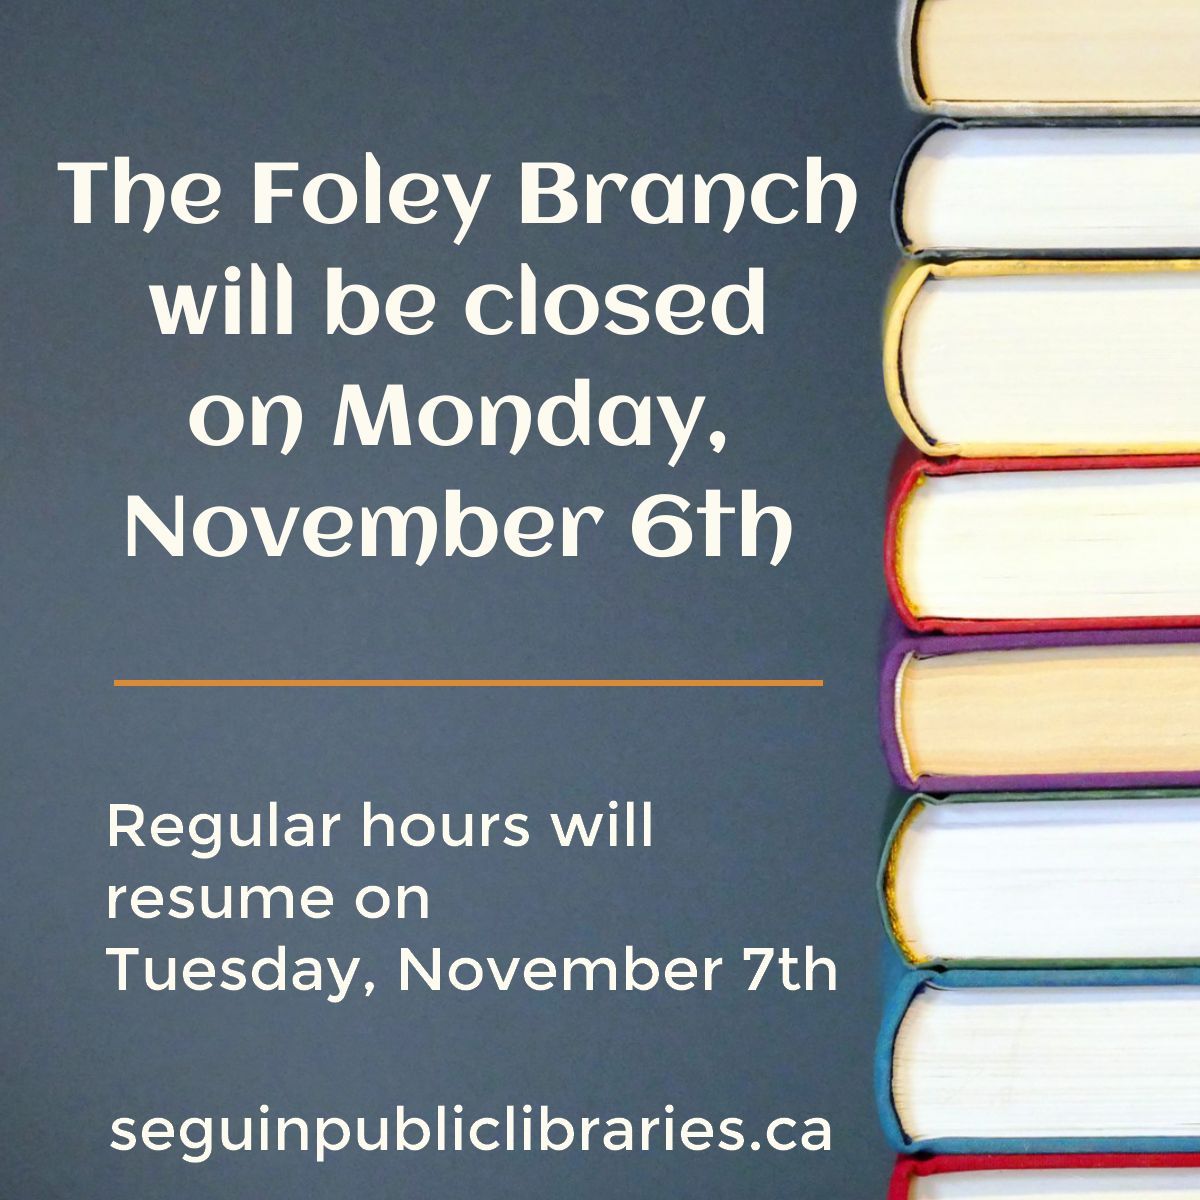 📢 Pop into the Foley branch tomorrow between 10 and 2, as this branch will be closed on Monday, November 6th, for a professional development event with staff.  Regular hours will resume at all branches on Tuesday.  #libraryupdate #librarynews #seguinpubliclibrariesON